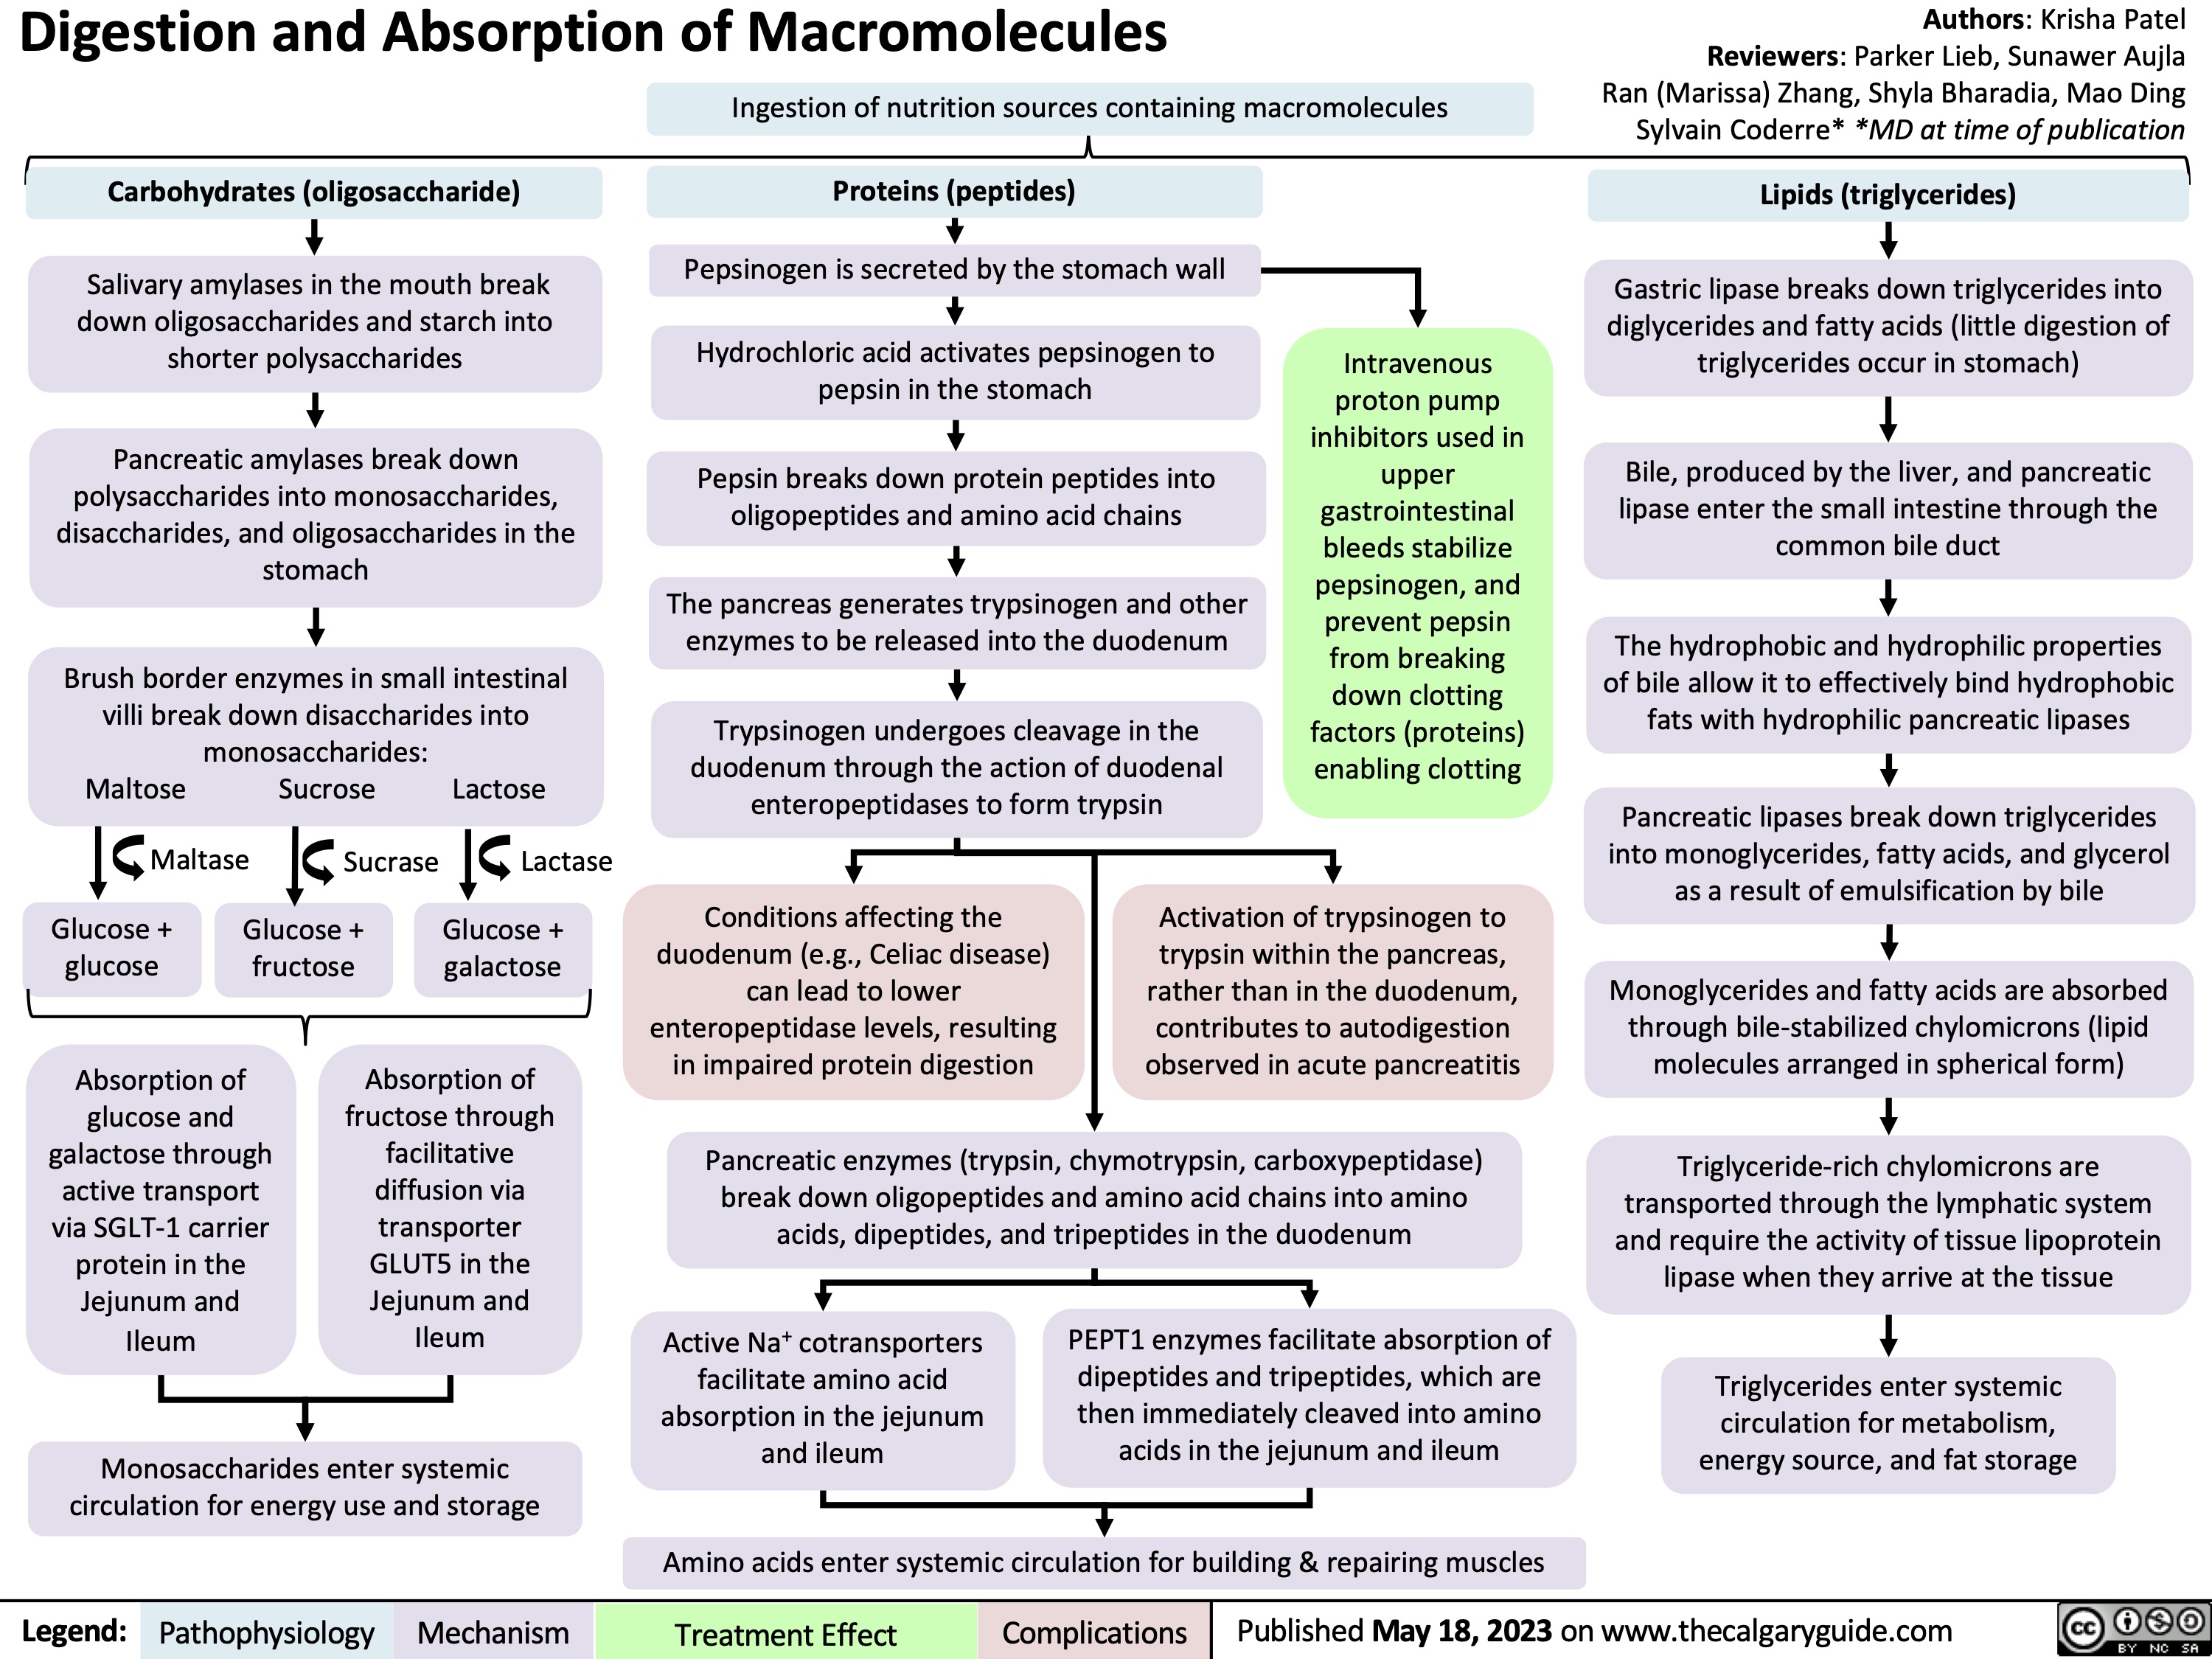 Digestion and Absorption of Macromolecules
Authors: Krisha Patel Reviewers: Parker Lieb, Sunawer Aujla Ran (Marissa) Zhang, Shyla Bharadia, Mao Ding Sylvain Coderre* *MD at time of publication
Lipids (triglycerides)
Gastric lipase breaks down triglycerides into diglycerides and fatty acids (little digestion of triglycerides occur in stomach)
Bile, produced by the liver, and pancreatic lipase enter the small intestine through the common bile duct
The hydrophobic and hydrophilic properties of bile allow it to effectively bind hydrophobic fats with hydrophilic pancreatic lipases
Pancreatic lipases break down triglycerides into monoglycerides, fatty acids, and glycerol as a result of emulsification by bile
Monoglycerides and fatty acids are absorbed through bile-stabilized chylomicrons (lipid molecules arranged in spherical form)
Triglyceride-rich chylomicrons are transported through the lymphatic system and require the activity of tissue lipoprotein lipase when they arrive at the tissue
Triglycerides enter systemic circulation for metabolism, energy source, and fat storage
 Ingestion of nutrition sources containing macromolecules
    Carbohydrates (oligosaccharide)
Salivary amylases in the mouth break down oligosaccharides and starch into shorter polysaccharides
Pancreatic amylases break down polysaccharides into monosaccharides, disaccharides, and oligosaccharides in the stomach
Brush border enzymes in small intestinal villi break down disaccharides into
Proteins (peptides)
Pepsinogen is secreted by the stomach wall
Hydrochloric acid activates pepsinogen to pepsin in the stomach
Pepsin breaks down protein peptides into oligopeptides and amino acid chains
The pancreas generates trypsinogen and other enzymes to be released into the duodenum
Trypsinogen undergoes cleavage in the duodenum through the action of duodenal enteropeptidases to form trypsin
Intravenous proton pump inhibitors used in upper gastrointestinal bleeds stabilize pepsinogen, and prevent pepsin from breaking down clotting factors (proteins) enabling clotting
             Maltose Maltase
monosaccharides: Sucrose
Sucrase
Glucose + fructose
Lactose Lactase
Glucose + galactose
          Glucose + glucose
Conditions affecting the duodenum (e.g., Celiac disease) can lead to lower enteropeptidase levels, resulting in impaired protein digestion
Activation of trypsinogen to
trypsin within the pancreas, rather than in the duodenum, contributes to autodigestion observed in acute pancreatitis
  Absorption of glucose and galactose through active transport via SGLT-1 carrier protein in the Jejunum and Ileum
Absorption of fructose through facilitative diffusion via transporter GLUT5 in the Jejunum and Ileum
Pancreatic enzymes (trypsin, chymotrypsin, carboxypeptidase) break down oligopeptides and amino acid chains into amino acids, dipeptides, and tripeptides in the duodenum
        Monosaccharides enter systemic circulation for energy use and storage
Active Na+ cotransporters facilitate amino acid absorption in the jejunum and ileum
PEPT1 enzymes facilitate absorption of dipeptides and tripeptides, which are then immediately cleaved into amino acids in the jejunum and ileum
  Amino acids enter systemic circulation for building & repairing muscles
 Legend:
 Pathophysiology
 Mechanism
 Treatment Effect
 Complications
 Published May 18, 2023 on www.thecalgaryguide.com
 